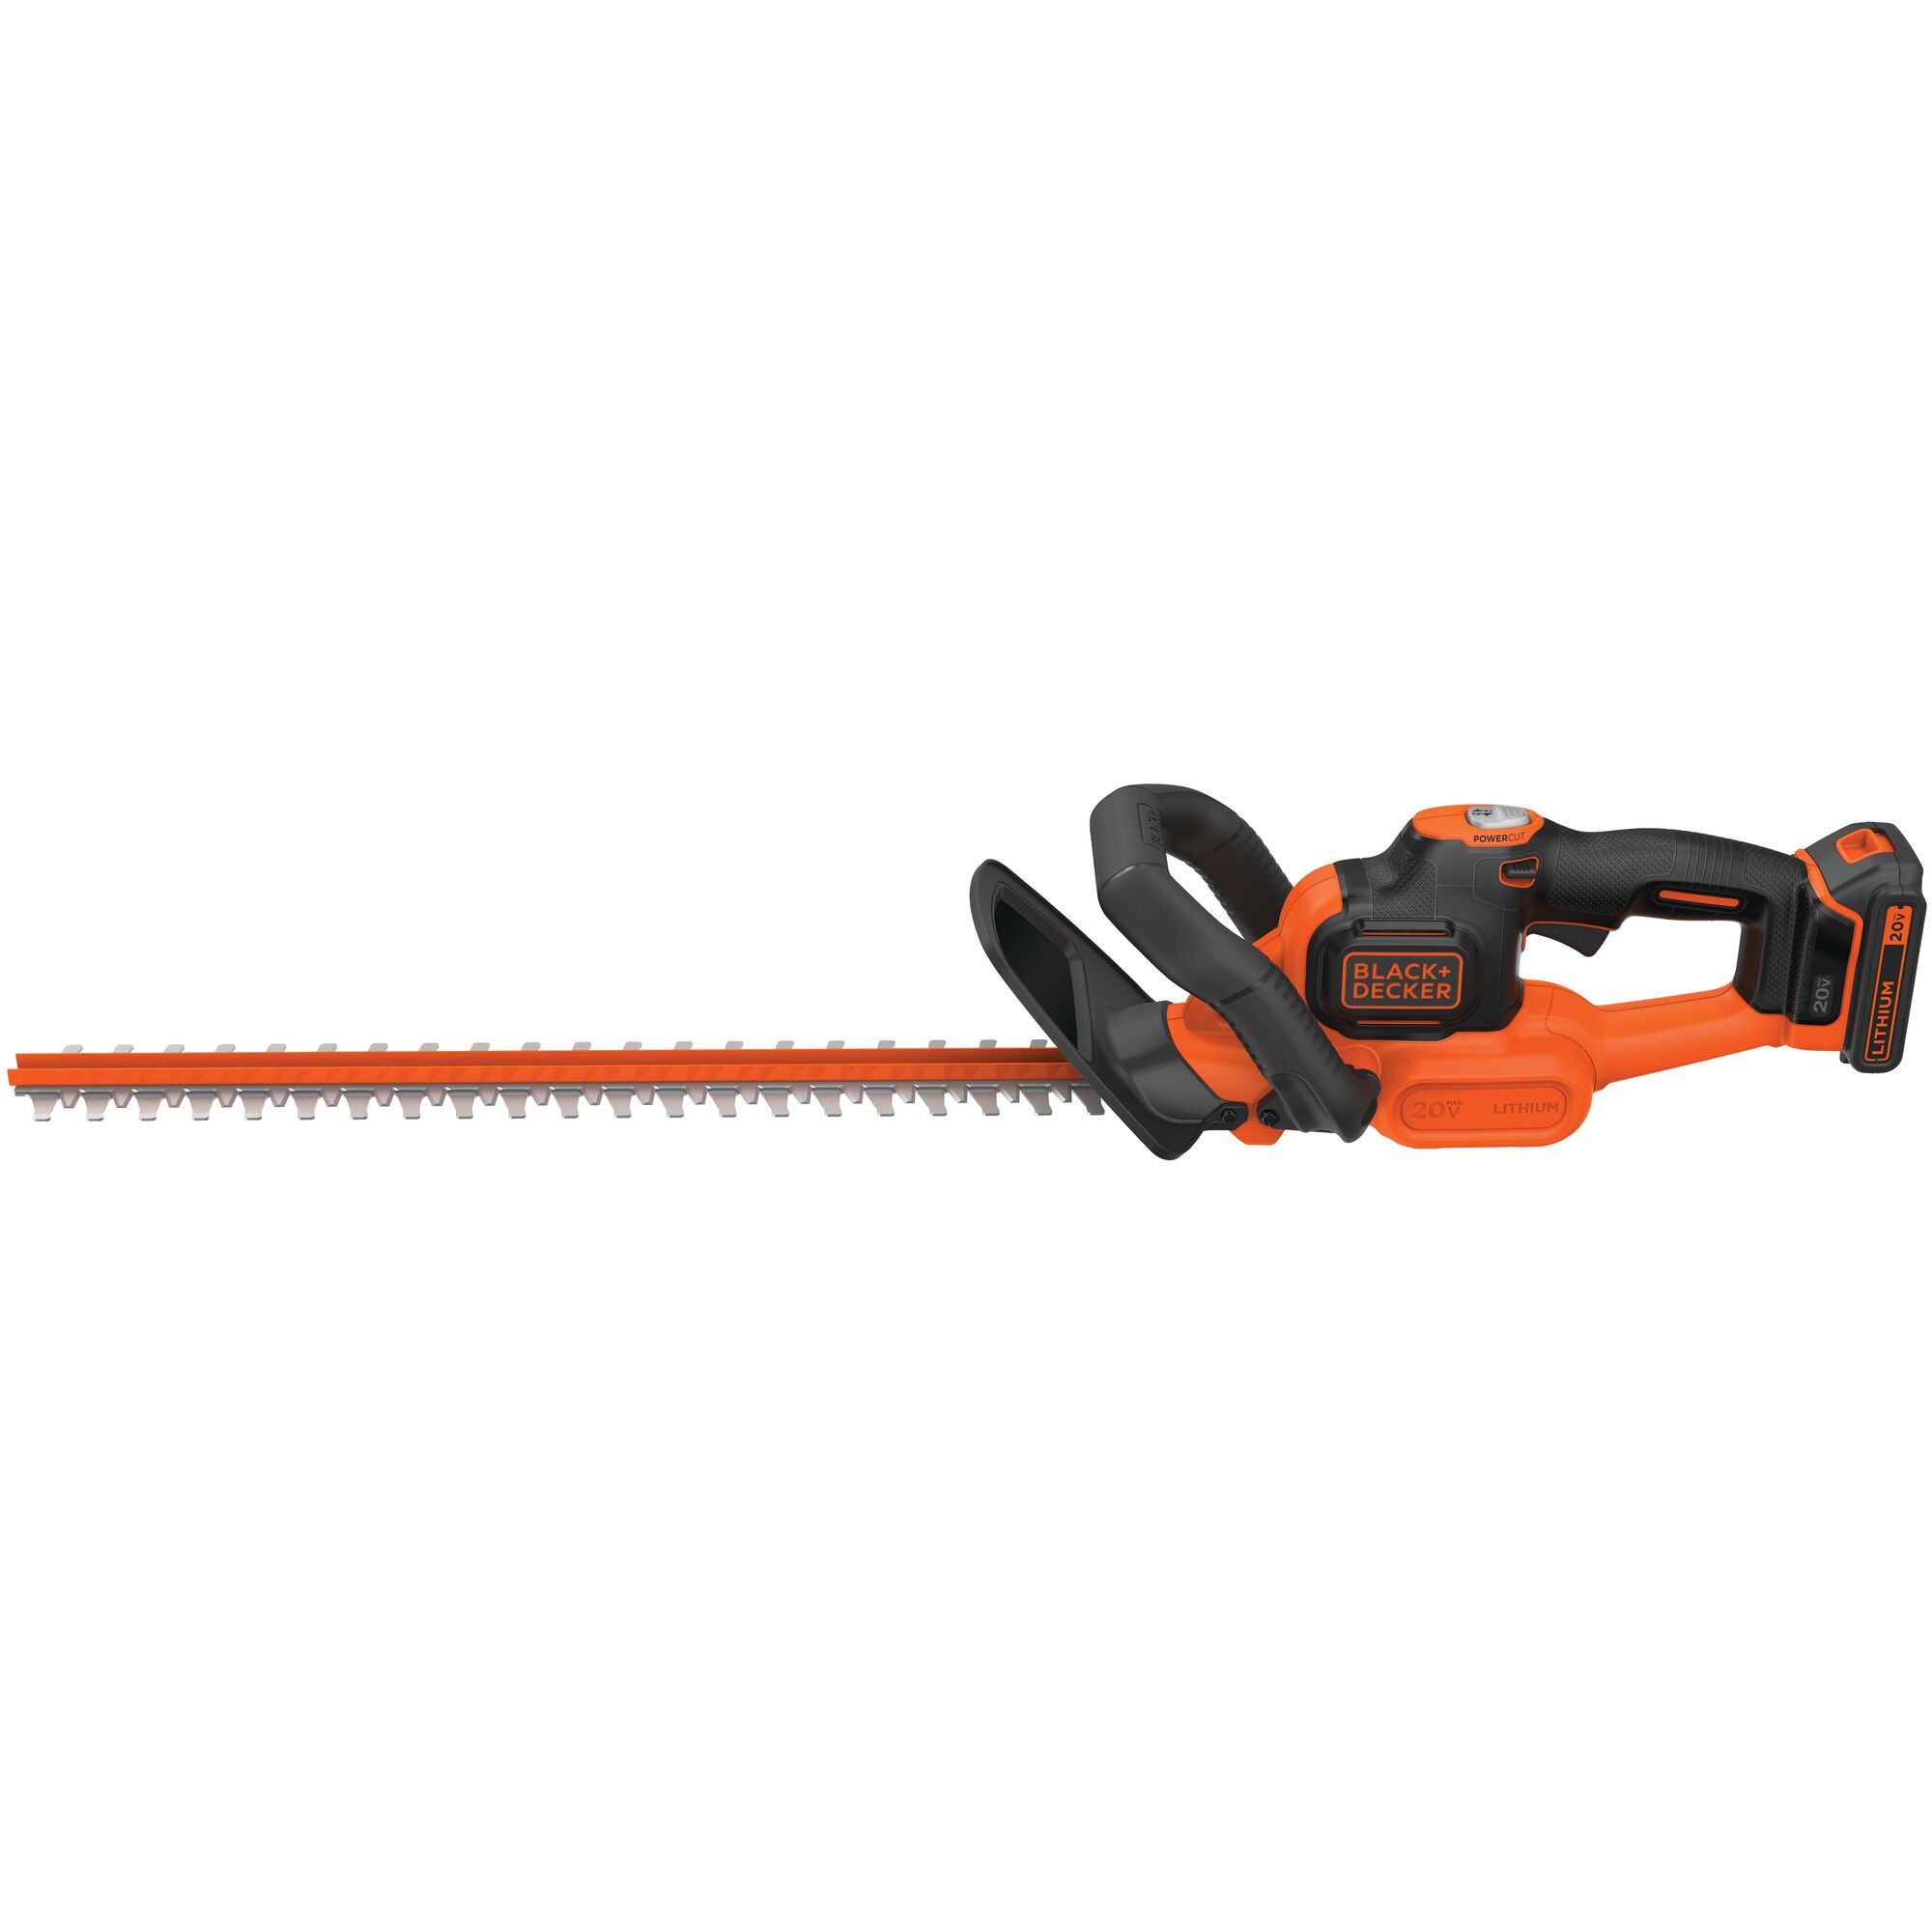 Profile of 20 Volt Max 22 Inch Powercut Hedge Trimmer on white background.